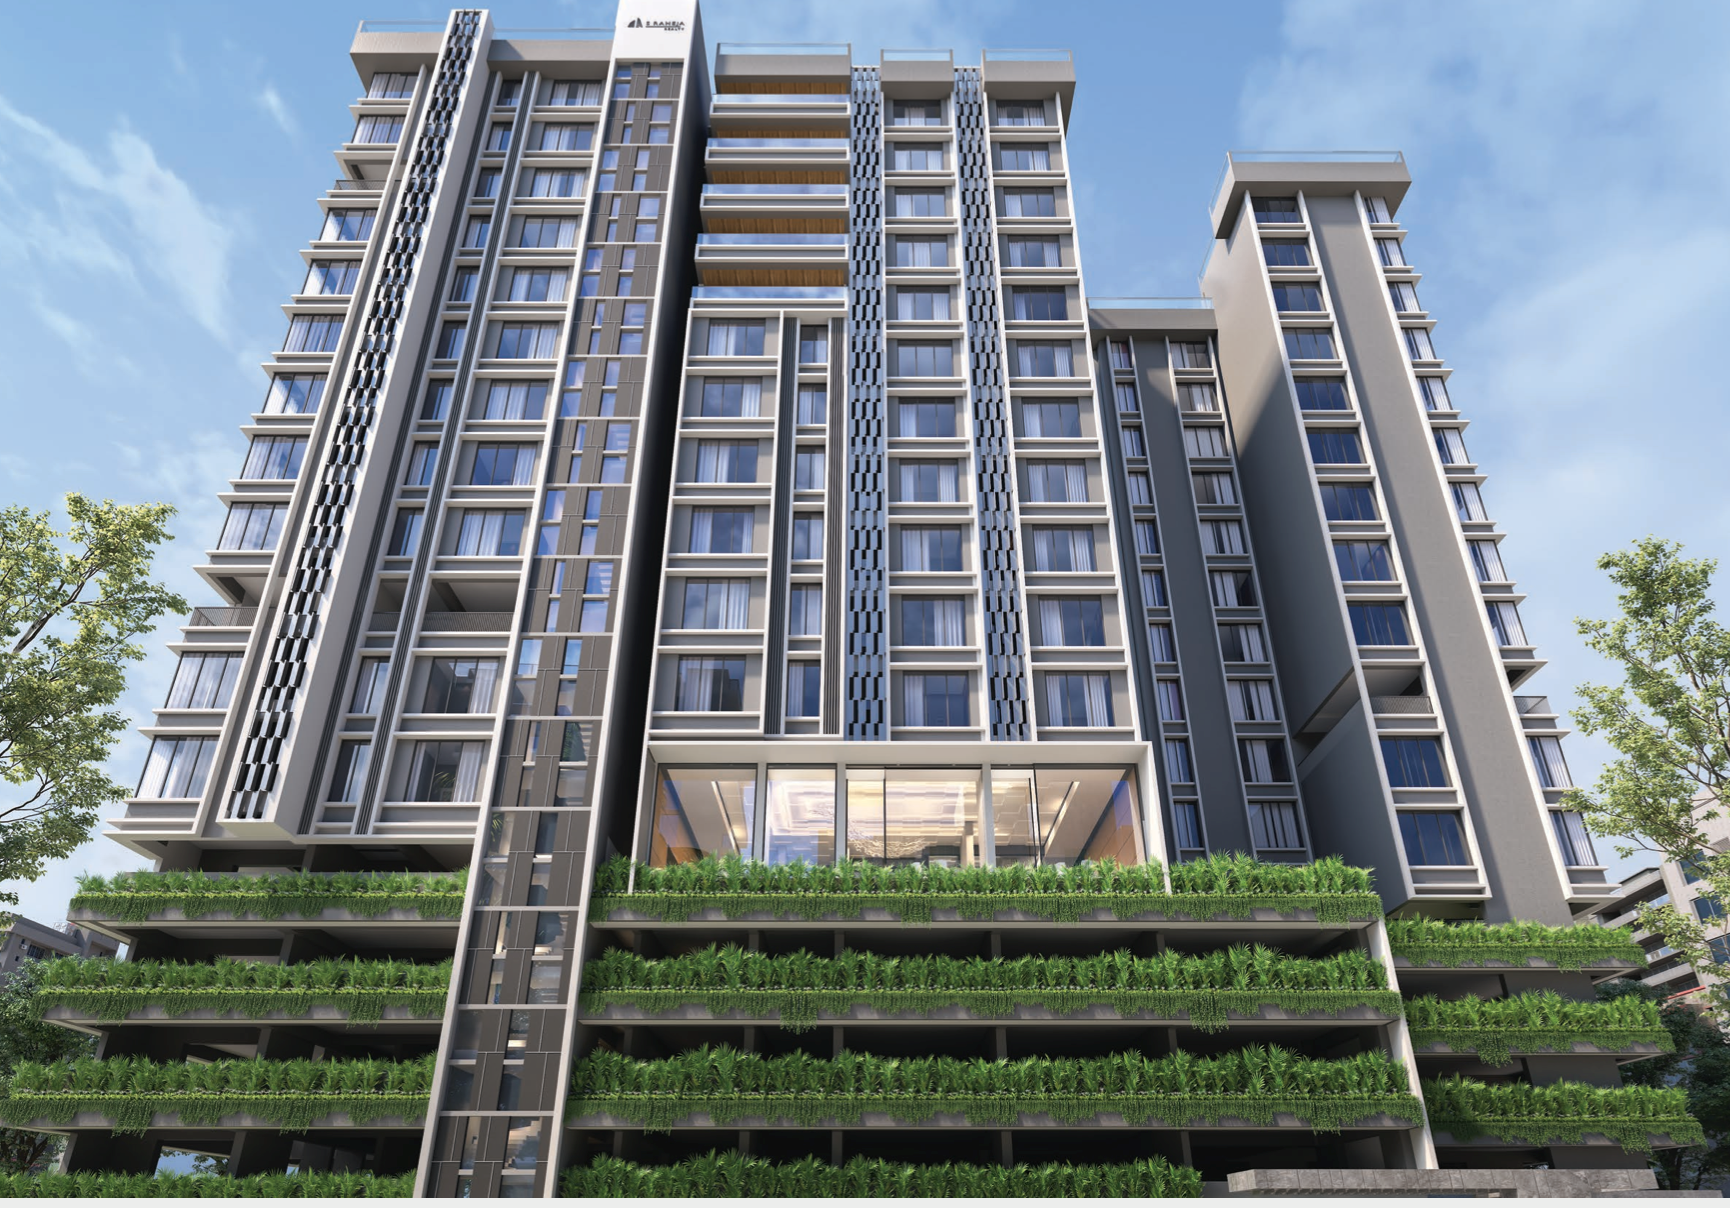 4 BHK Flat for Sale in Khar West - New Light Apartments